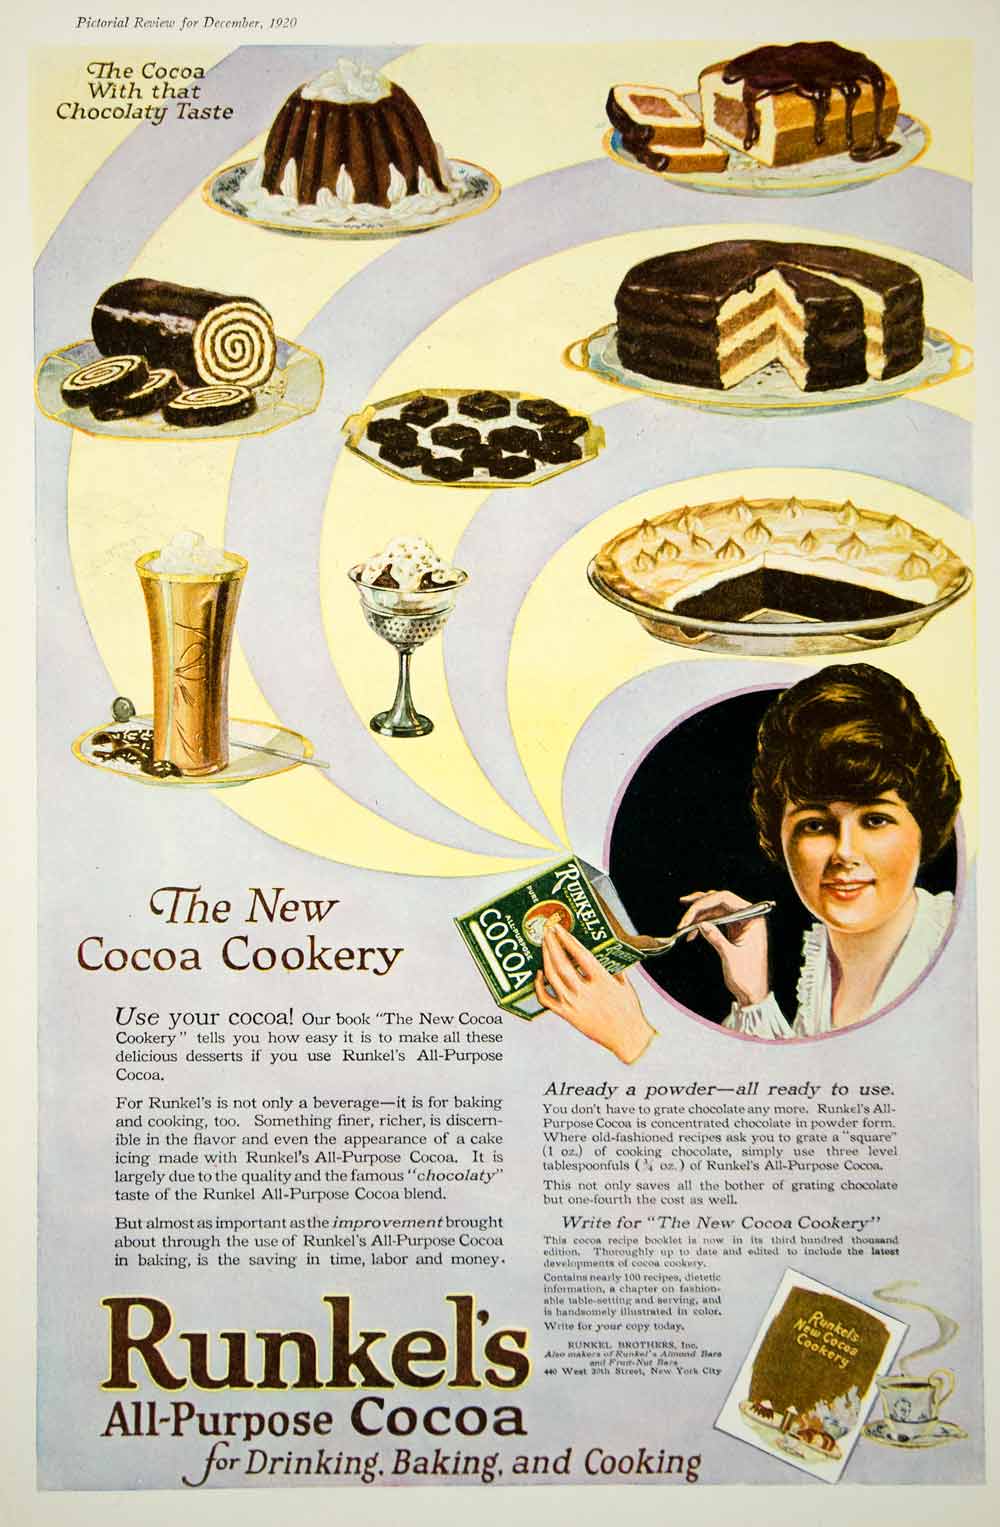 1920 Ad Vintage Runkel's Cocoa Baking Chocolate Cooking Desserts Beverage Drink